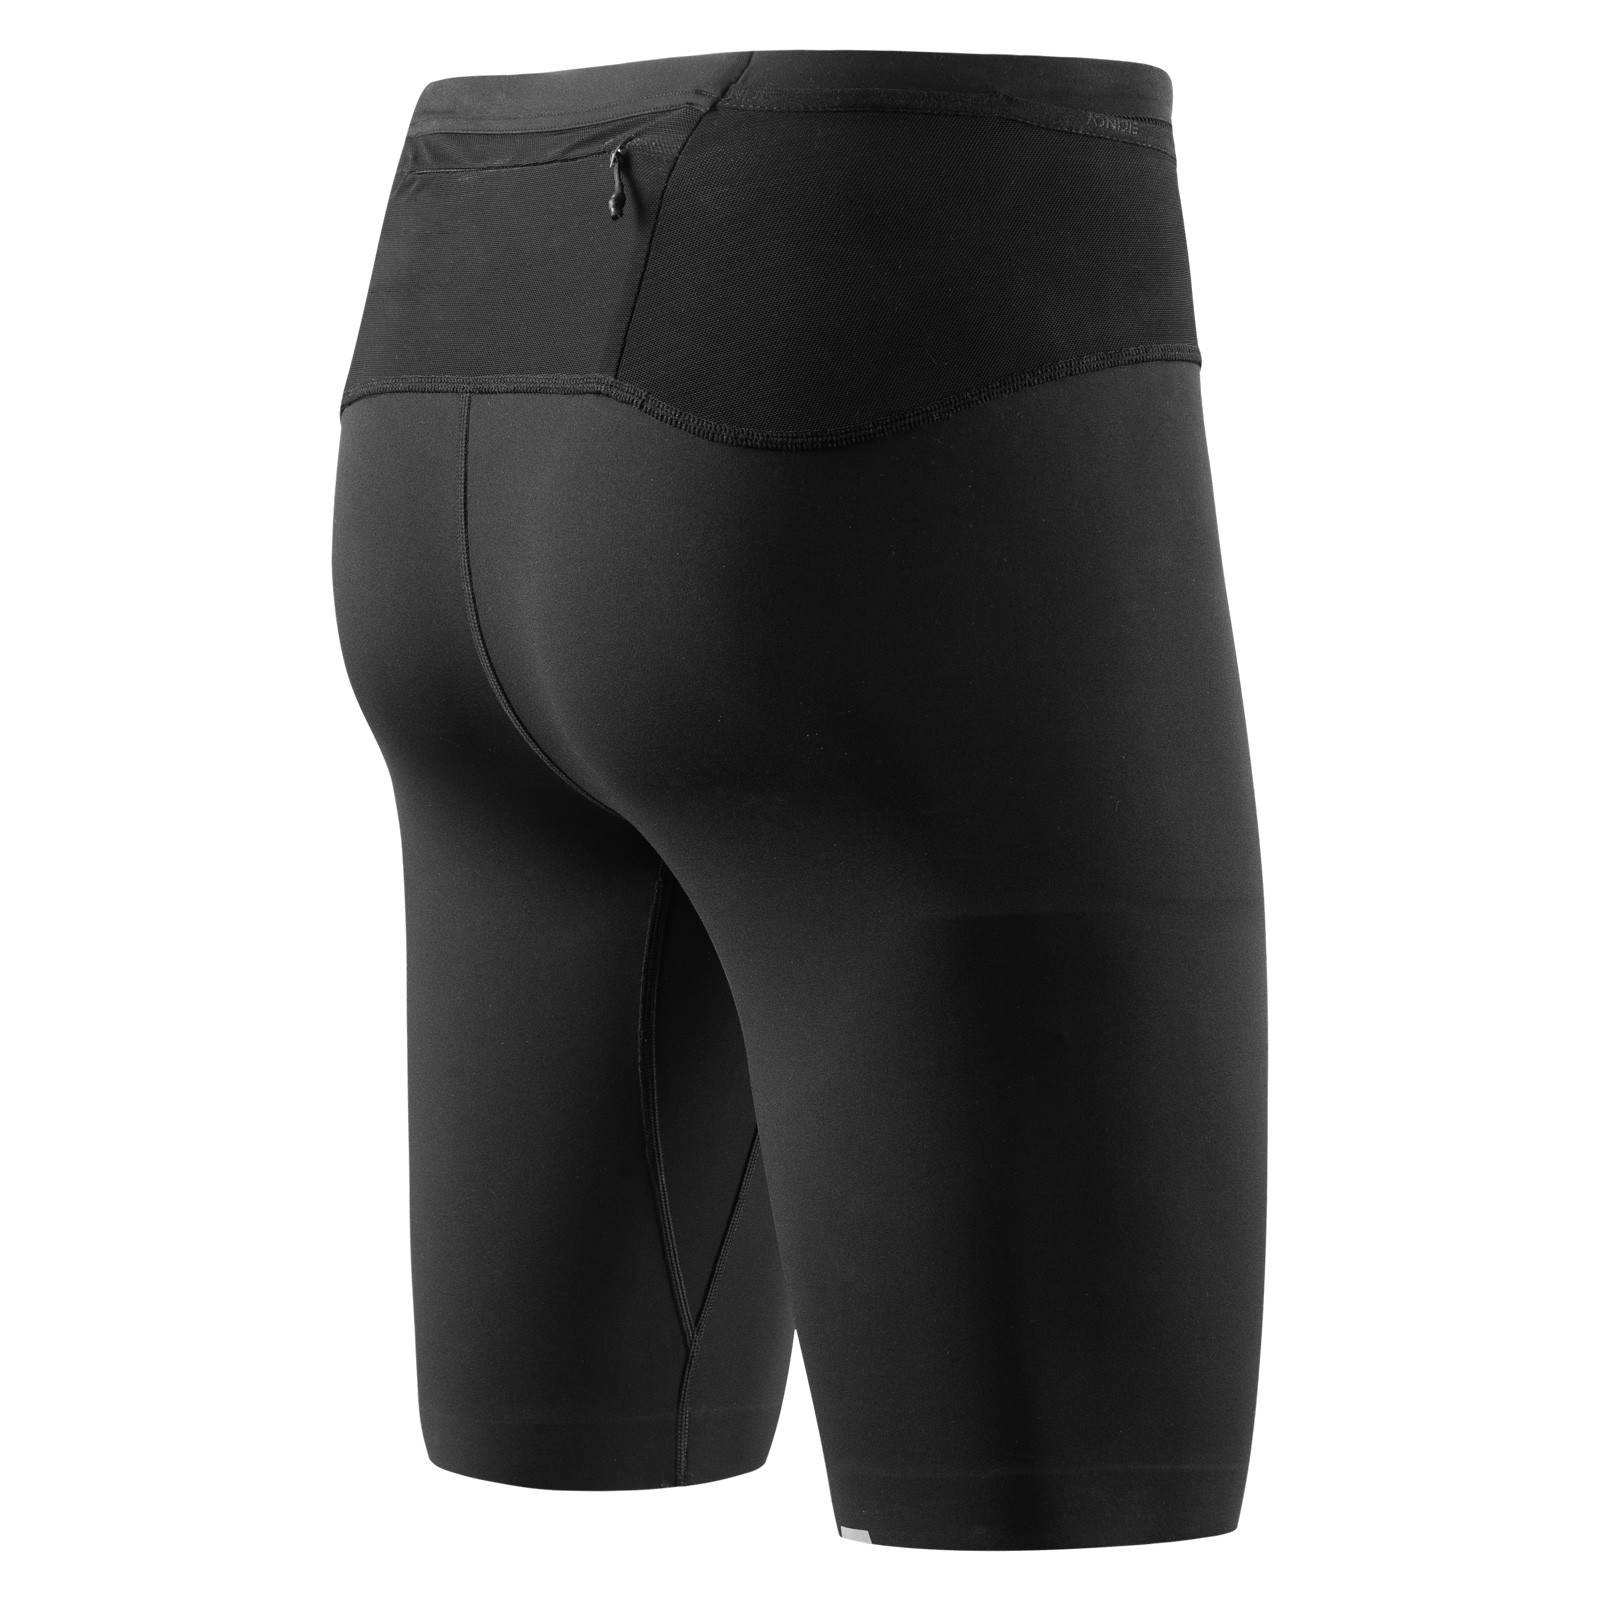 Men 2 In 1 Running Shorts Compression Pants Sport Leggings Breathable Quick  Dry Tights-L-Black 